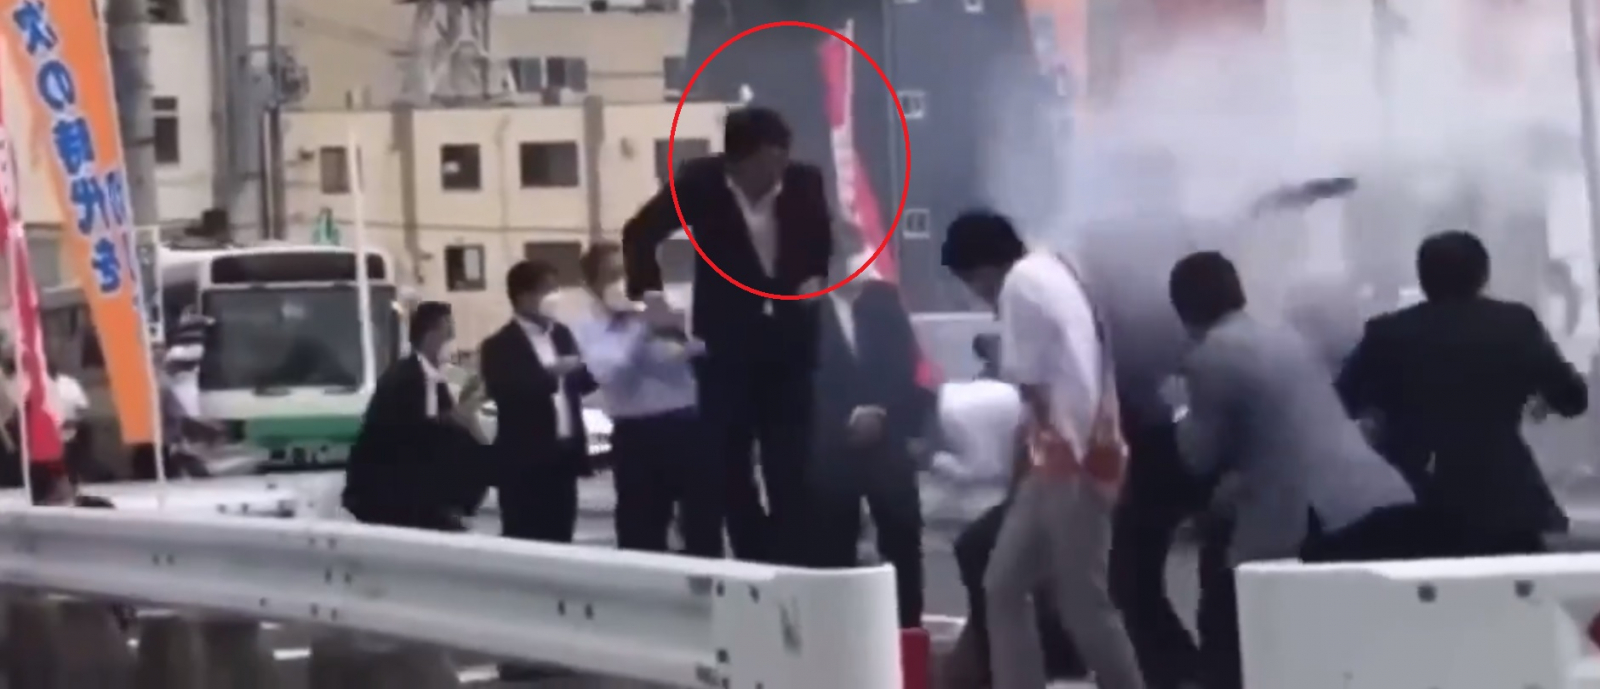 Chilling Video Captures Moment Tetsuya Yamagami Shoots Shinzo Abe From Behind As He Holds His